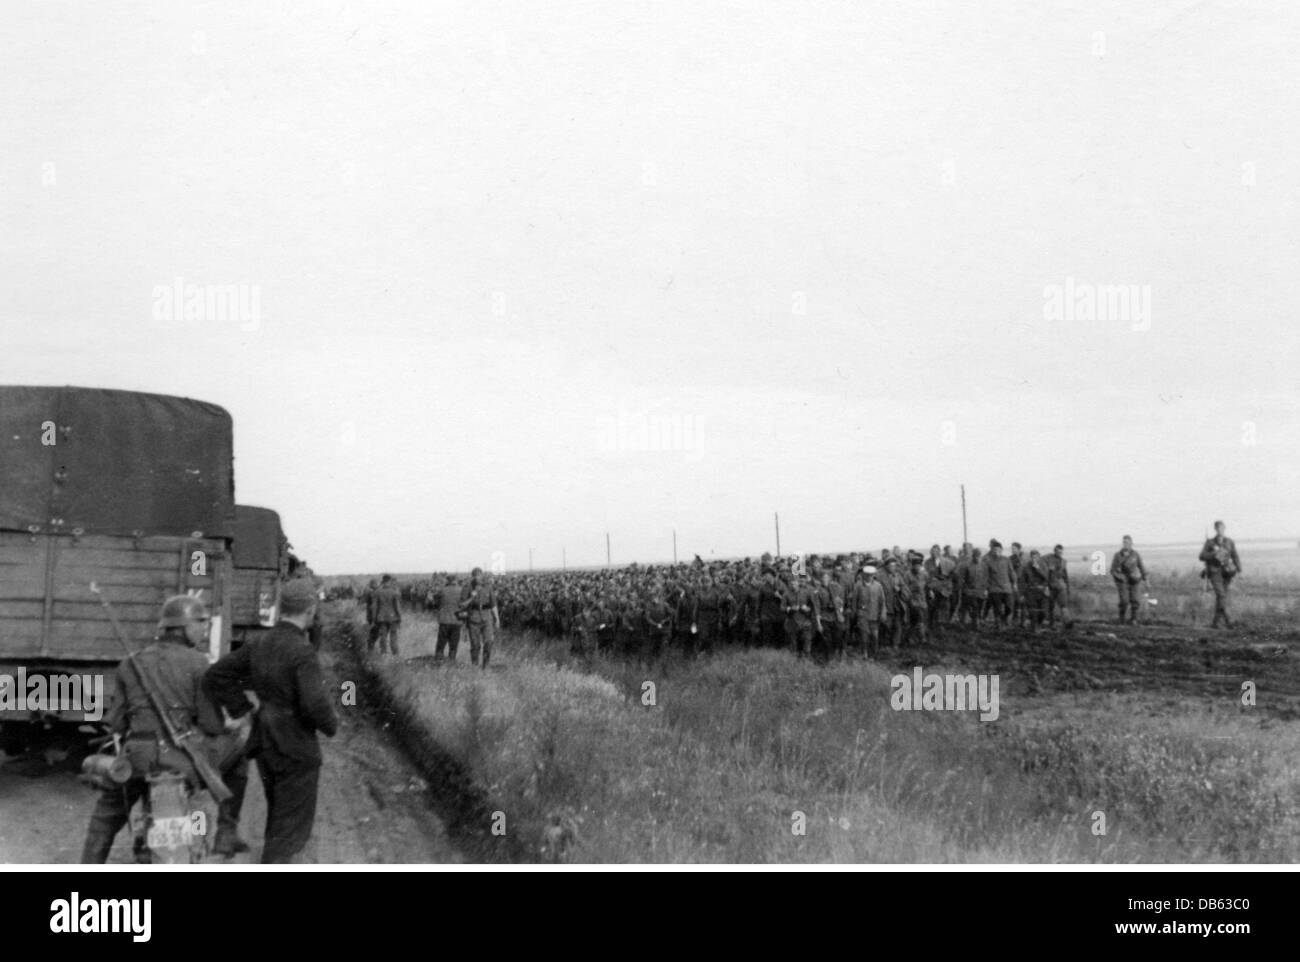 Second World War / WWII, Soviet Union, summer 1941, a convoy of a Reichsarbeitsdienst (Reich Labor Service) unit, deployed on the Eastern Front (Abteilung K. 1/130) and advancing with Panzer Group Kleist, coming across a column of Soviet prisoners of war, Ukraine, 1941, Additional-Rights-Clearences-Not Available Stock Photo